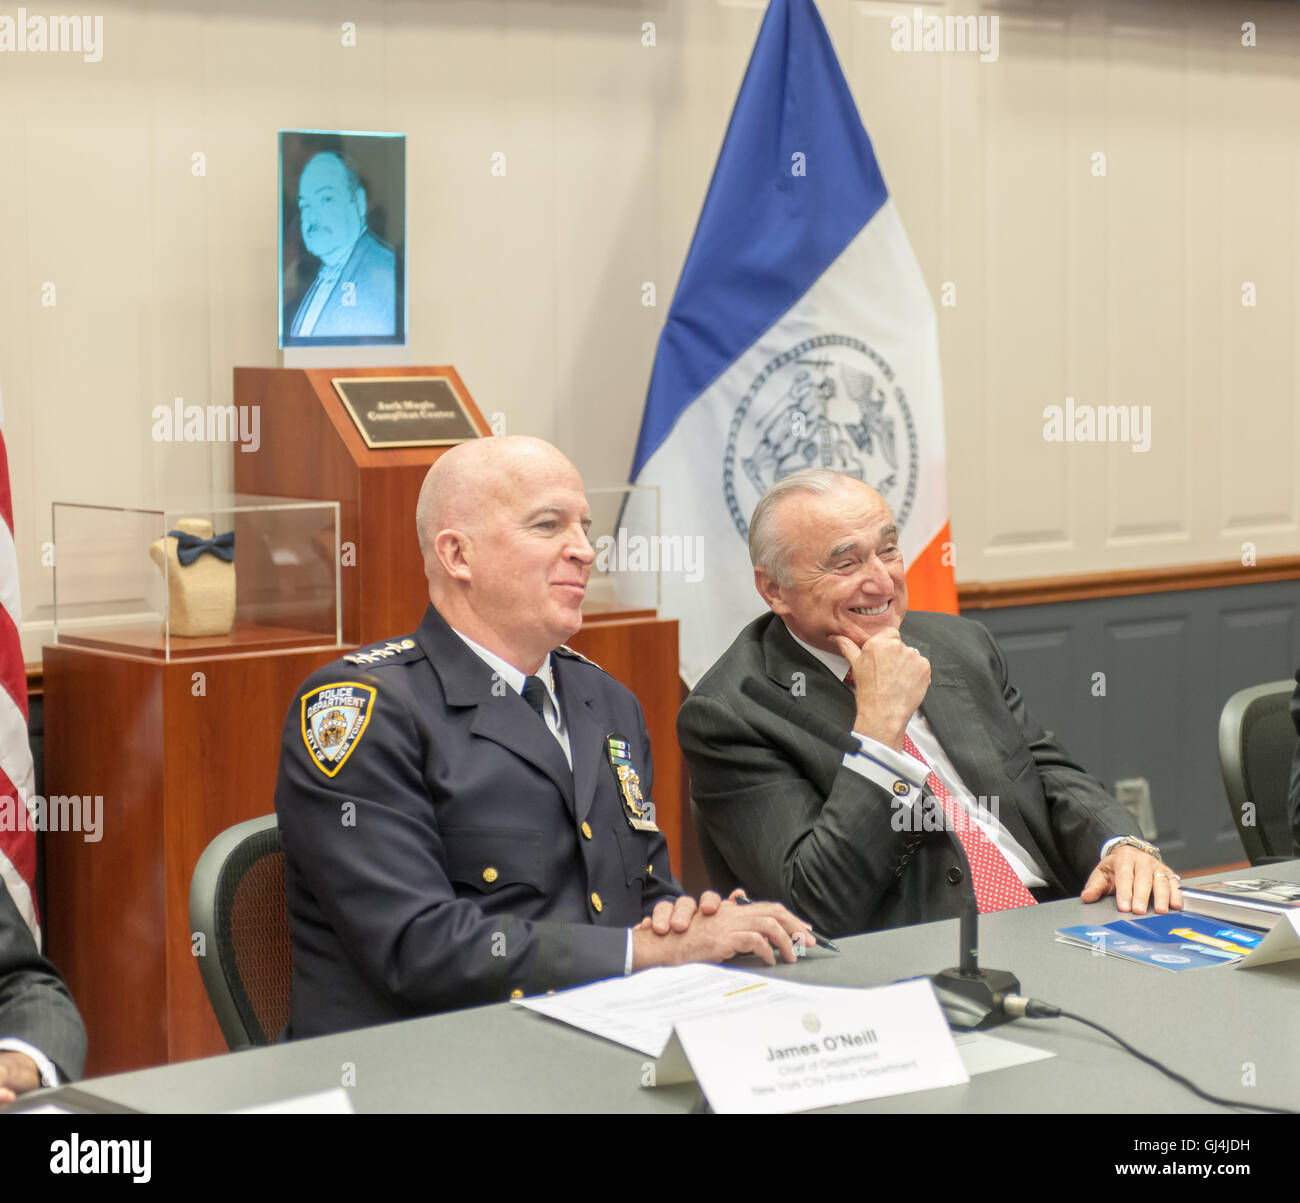 NYPD Commissioner William Bratton, right, and Chief of Department Jimmy O'Neill report to the press in the Jack Maples Compstat Room at One Police Plaza in New York on Thursday, August 4, 2016. The officials answered police related questions from the press as well as briefing the media on the ongoing decrease in violent crime in the city. O'Neill is to take over as commissioner in September when Bratton leaves. (© Richard B. Levine) Stock Photo